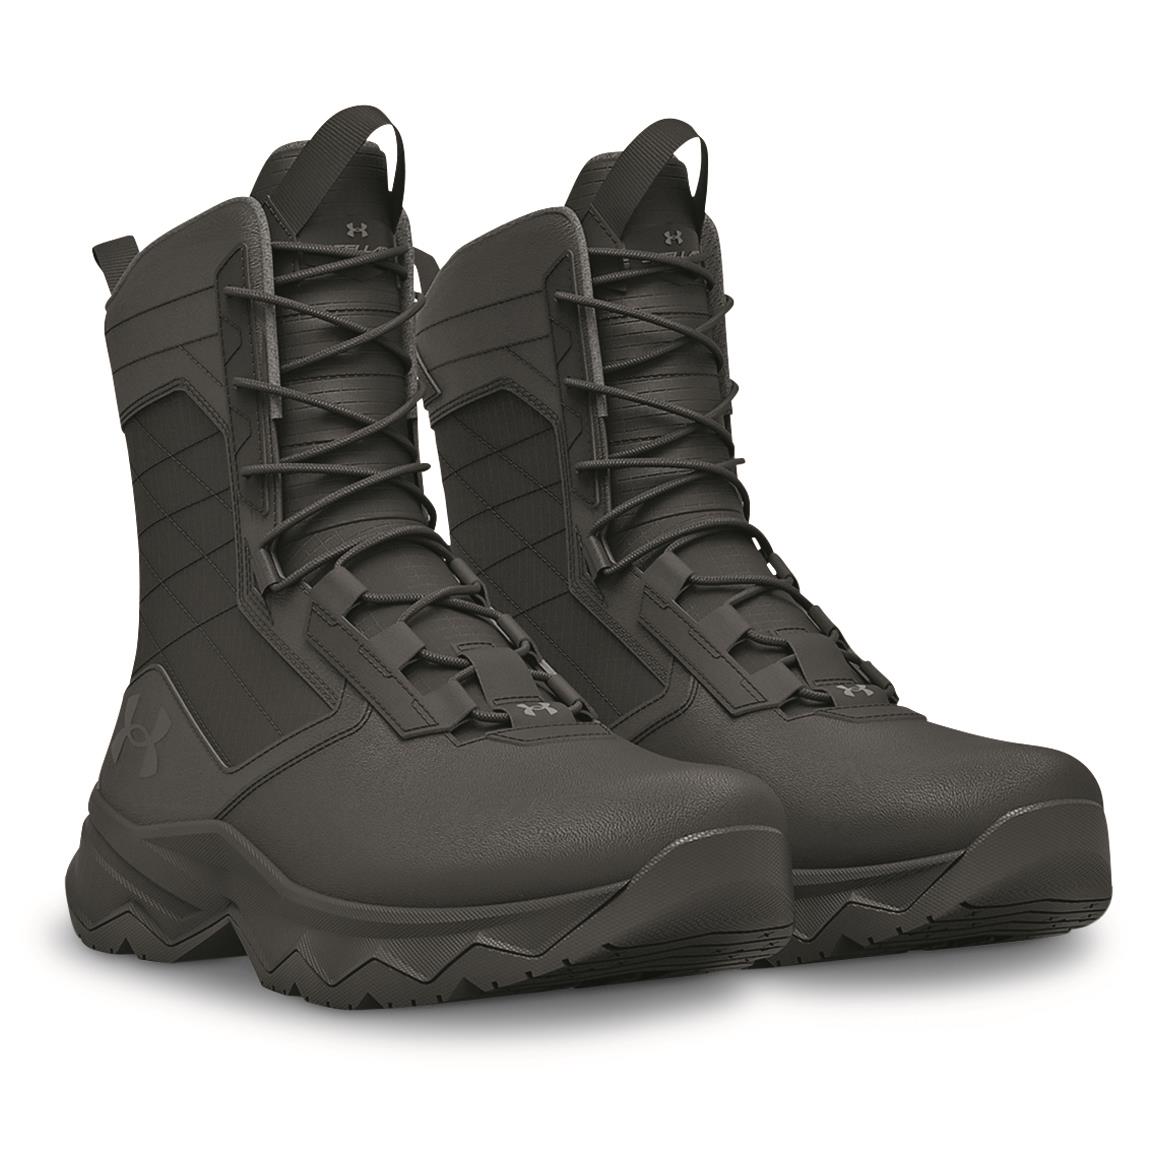 Under Armour Men's Stellar G2 Tactical Boots, Black/Black/Pitch Gray